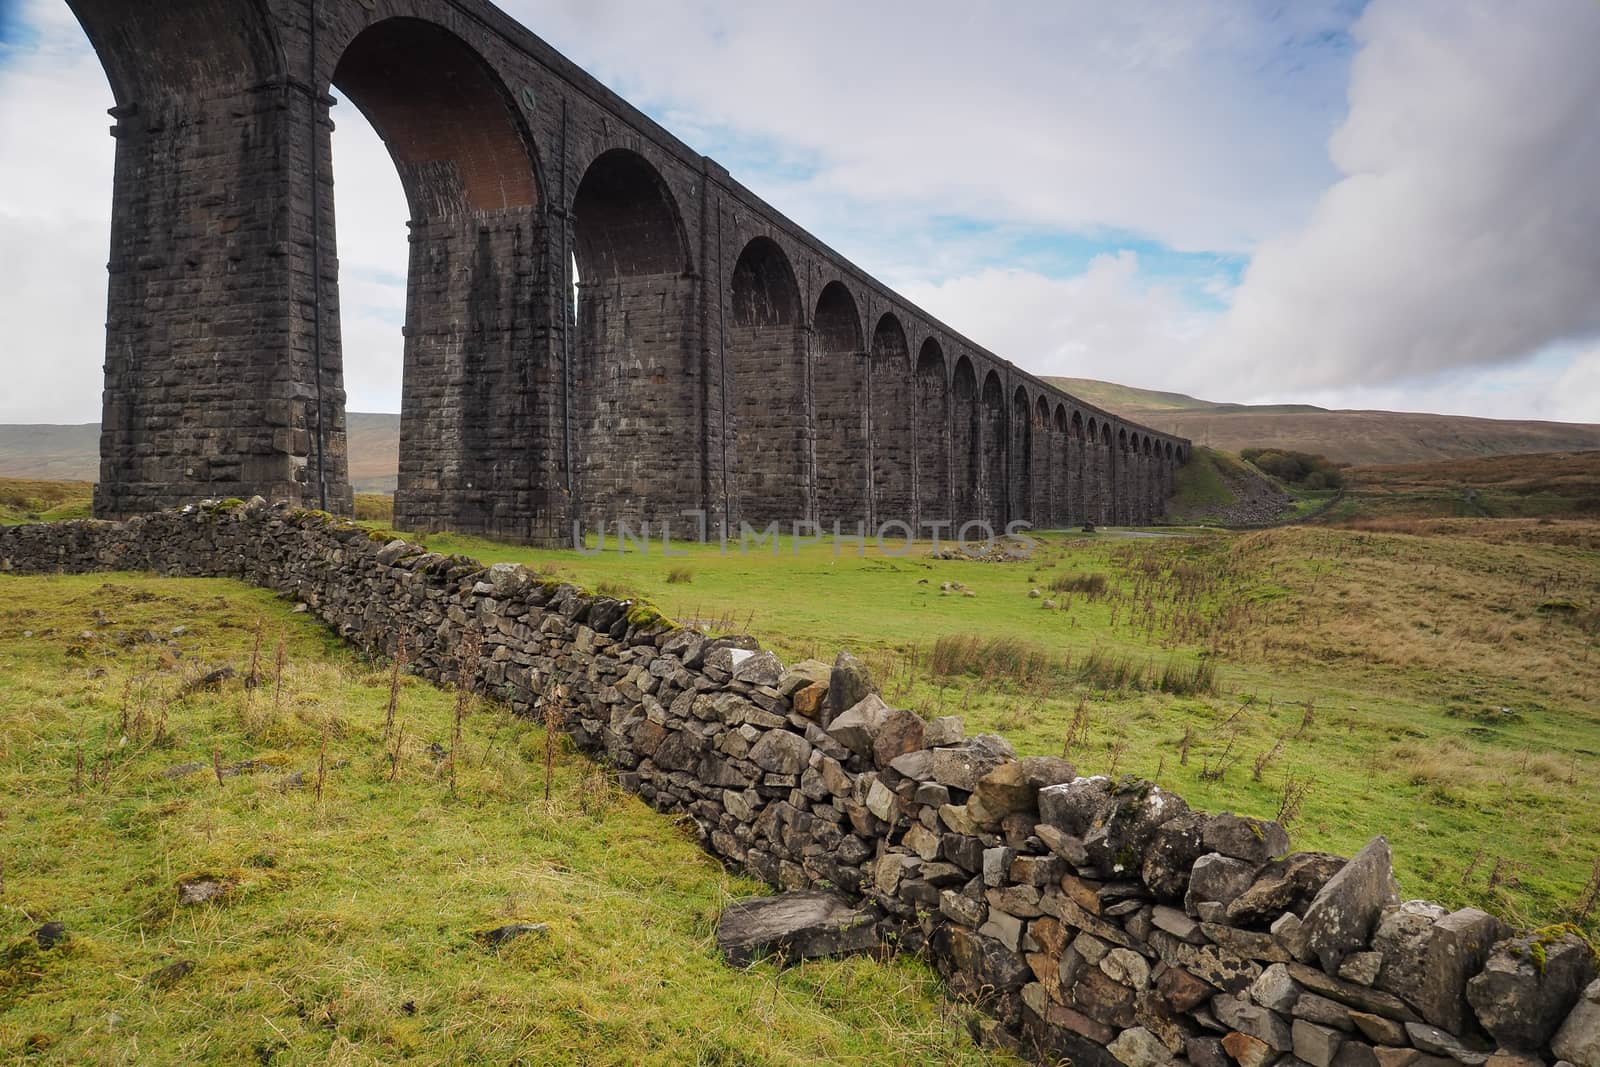 The iconic Ribblehead Viaduct or Batty Moss Viaduct which carries the Settle to Carlisle railway across Batty Moss in the Ribble Valley, Yorkshire Dales, UK